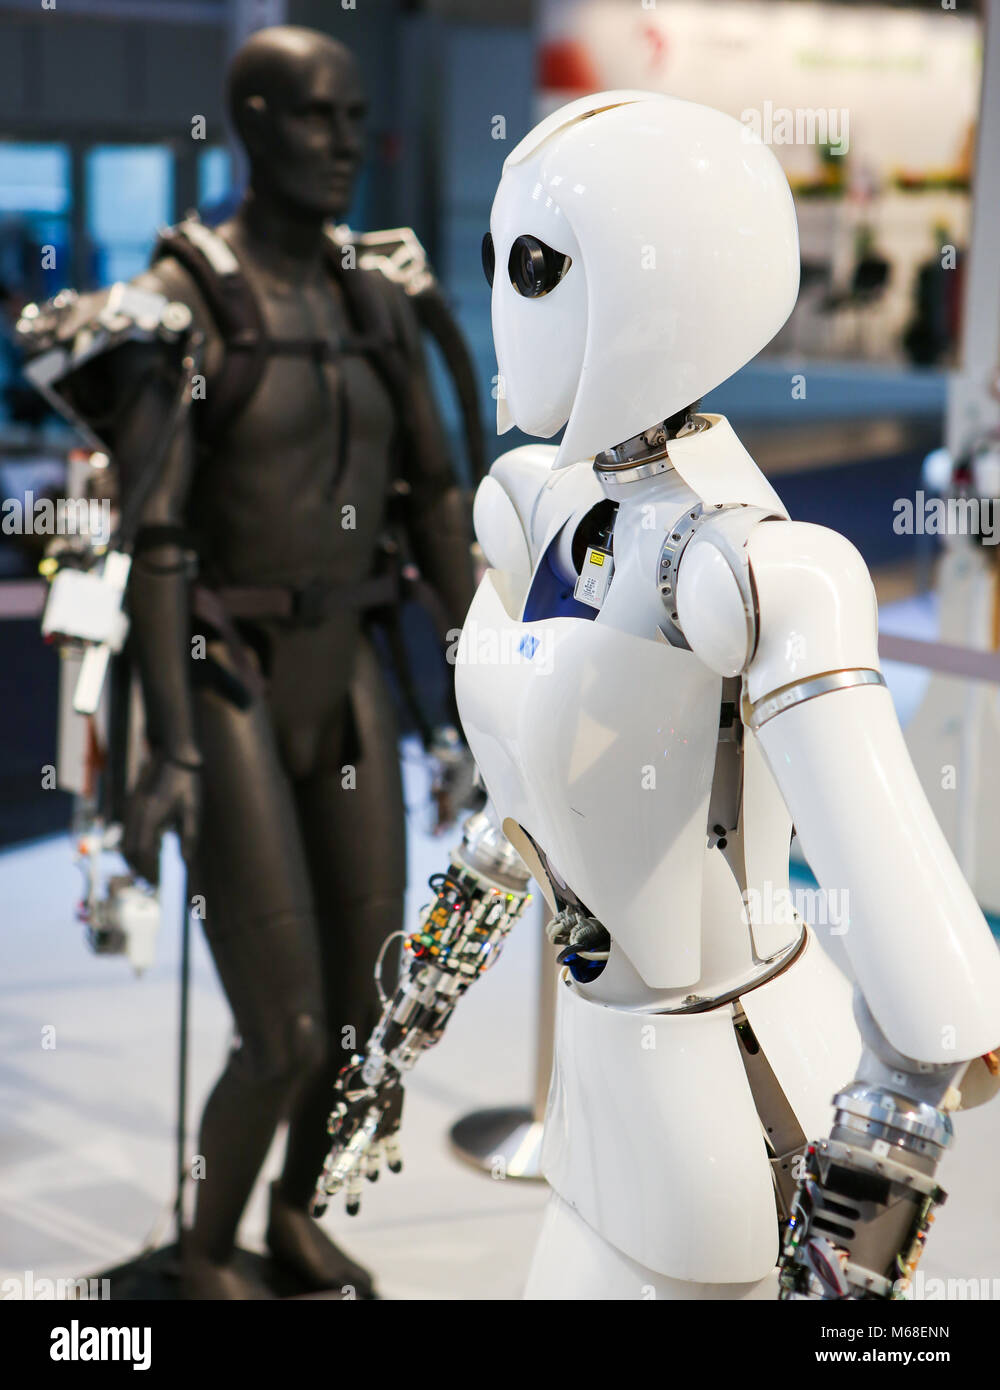 Hanover, Germany. 20th March, 2017. CeBIT 2017, ICT trade fair: robot AILA,  a mobile dual-arm robot system, developed as a research platform for  investigating aspects of the multidisciplinary area of mobile manipulation,